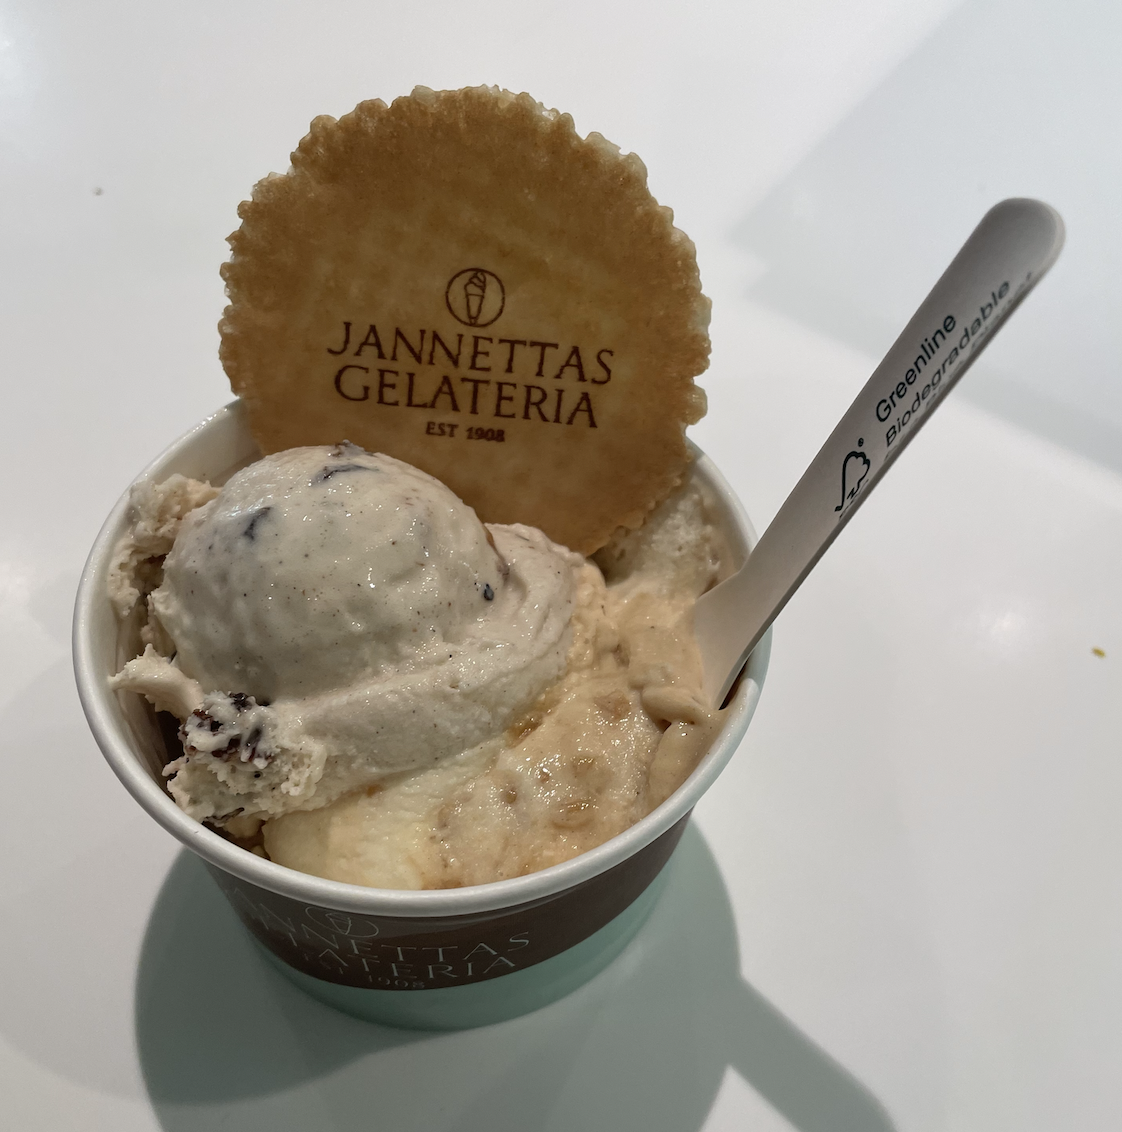 Two scoops of ice cream, one Christmas pudding flavour and another spiced apple, in a tub with a wafer that says "Jannettas Gelateria", a famous place for gelato in St Andrews, Scotland.